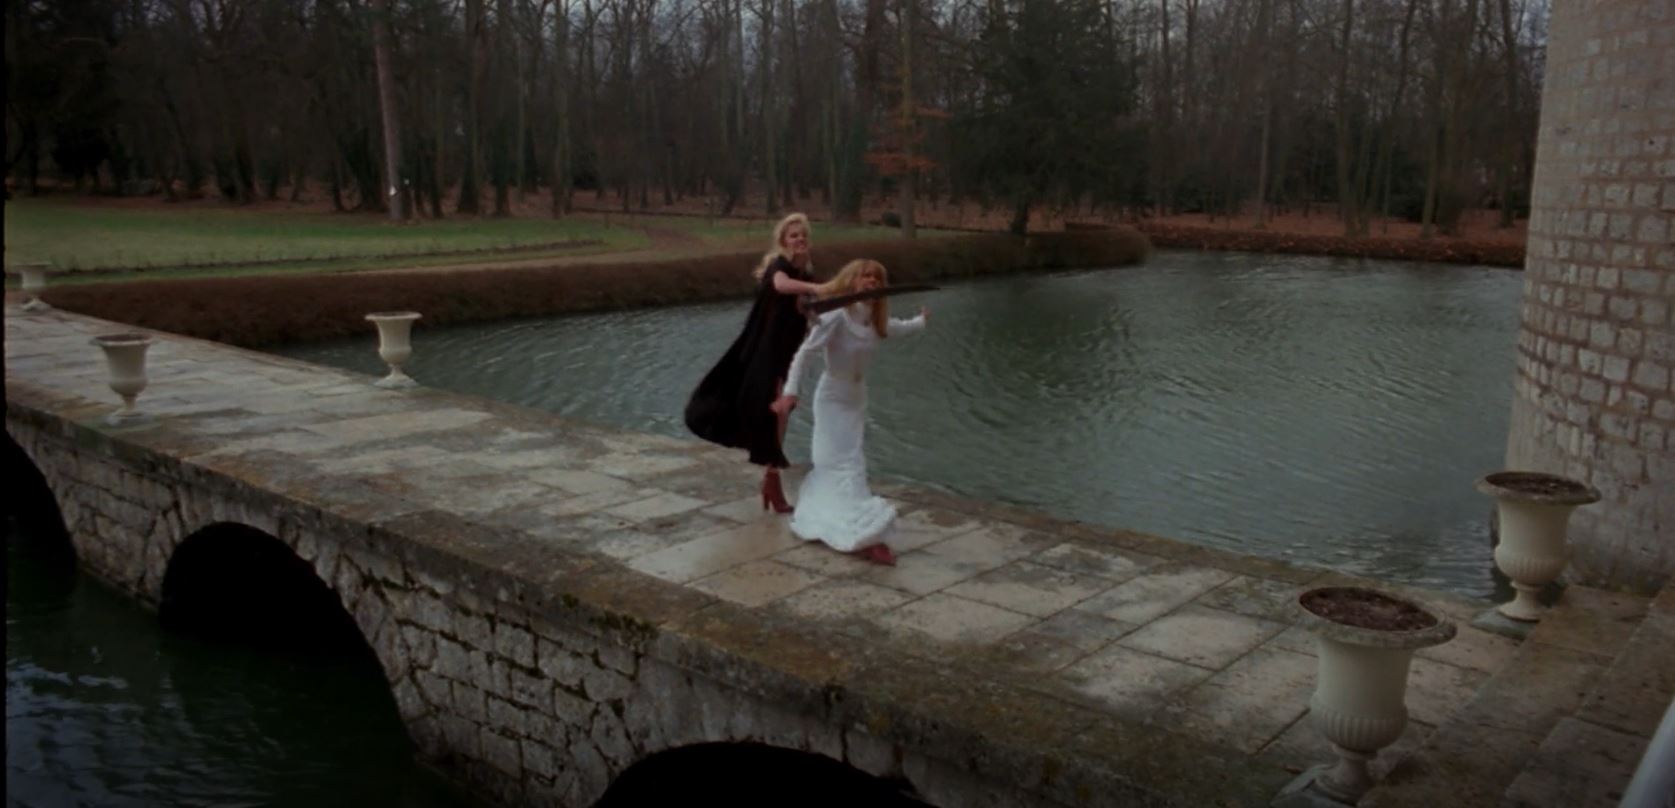 Scene from Fascination (1979)